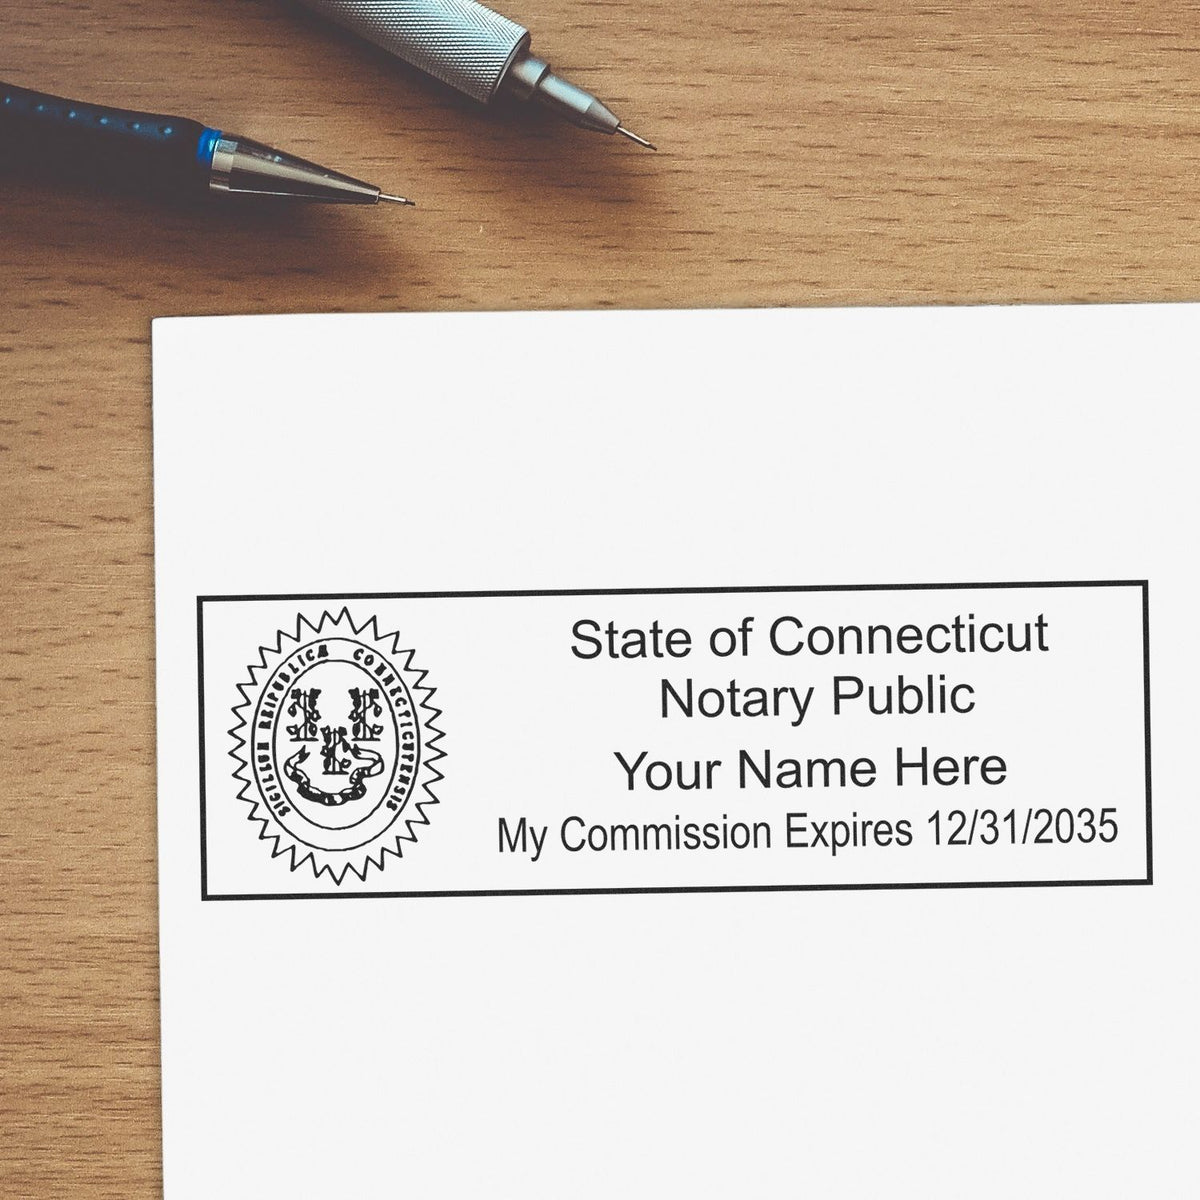 A photograph of the MaxLight Premium Pre-Inked Connecticut State Seal Notarial Stamp stamp impression reveals a vivid, professional image of the on paper.